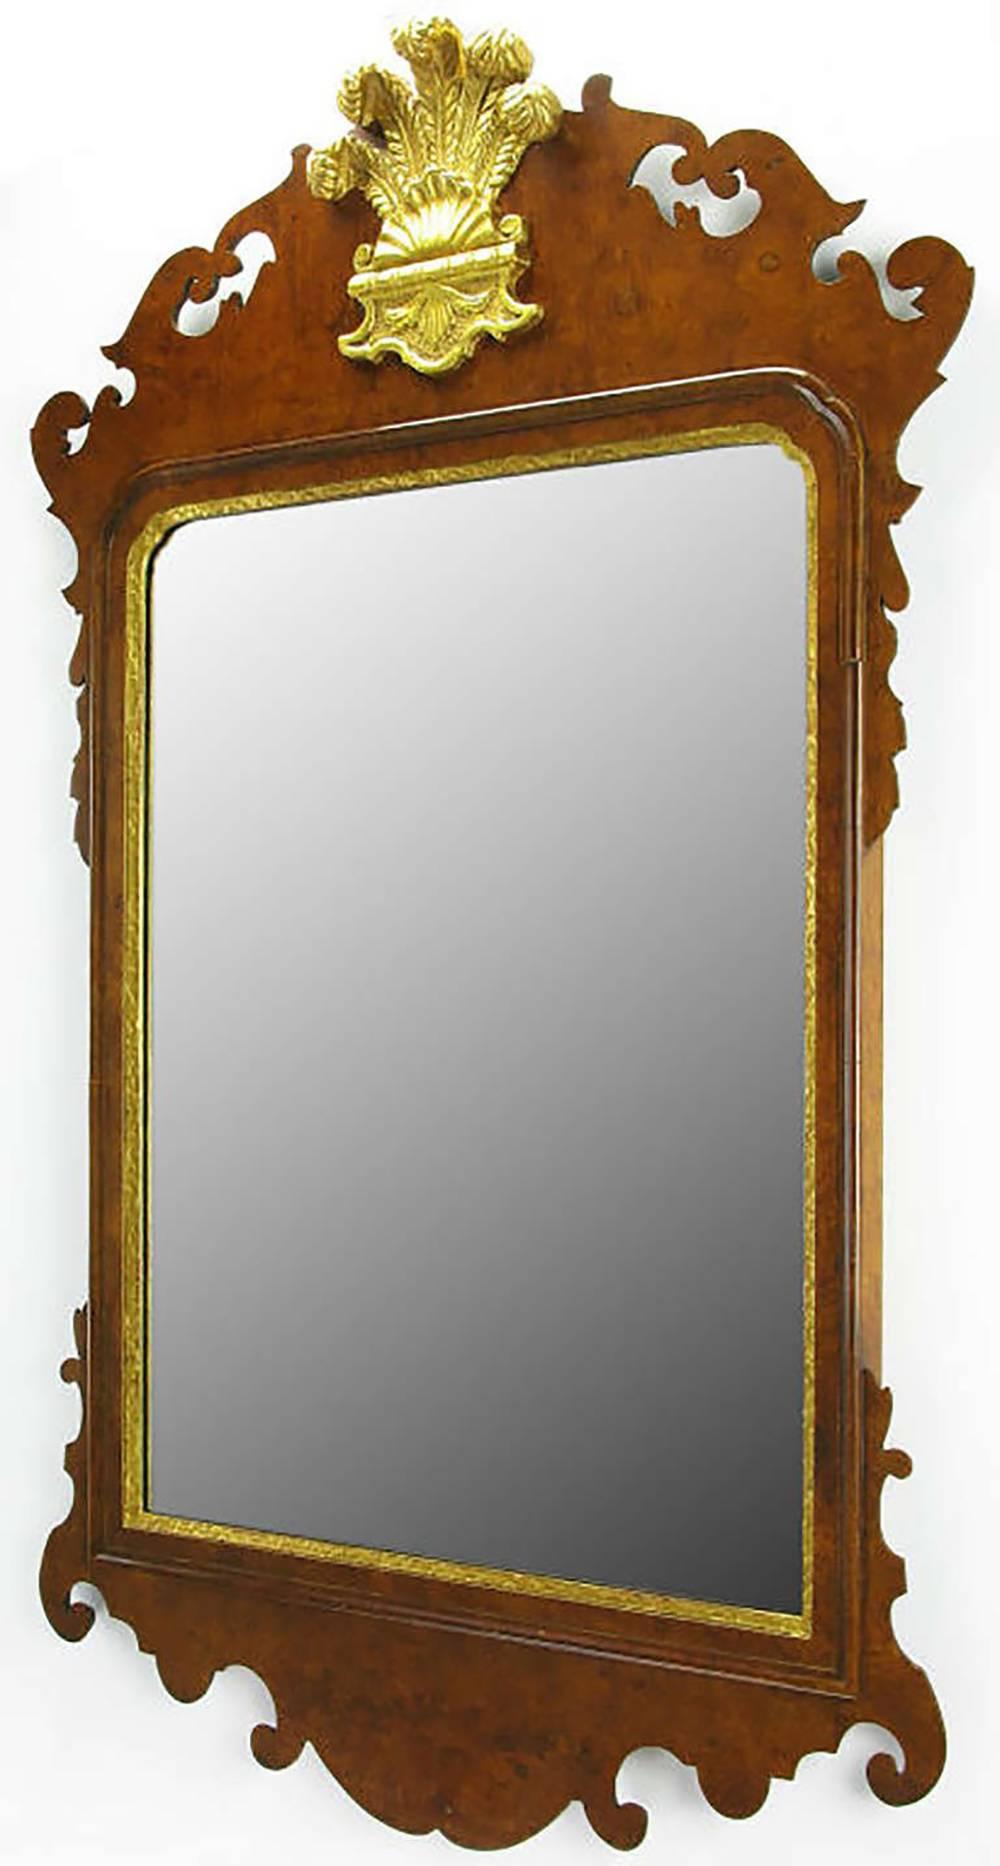 Chippendale beveled mirror in burled walnut with gold leaf plume and interior border, by Fine antique reproductionists, Williamsburg Restoration Inc. The original from which this mirror was exactly replicated hangs in the west hall of the Raleigh